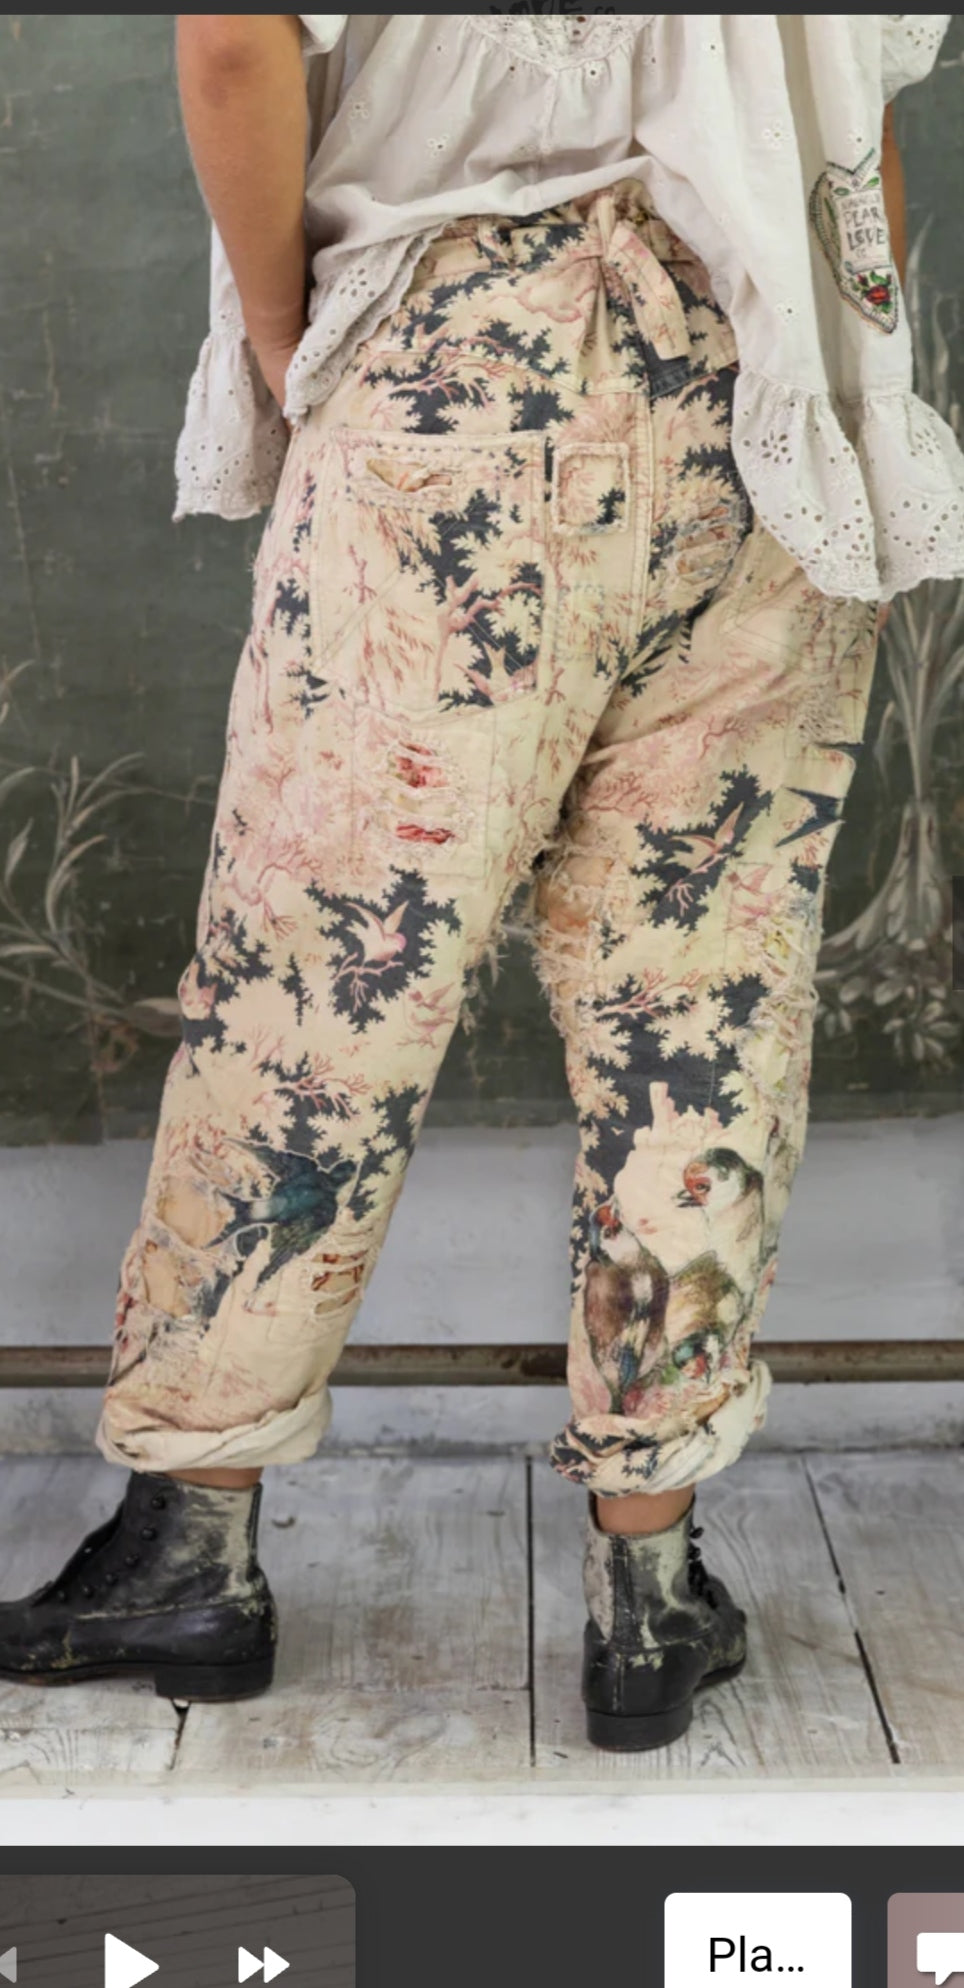 Magnolia Pearl | Hose Miner Denims 373 in French Toil one size|  Pants 373